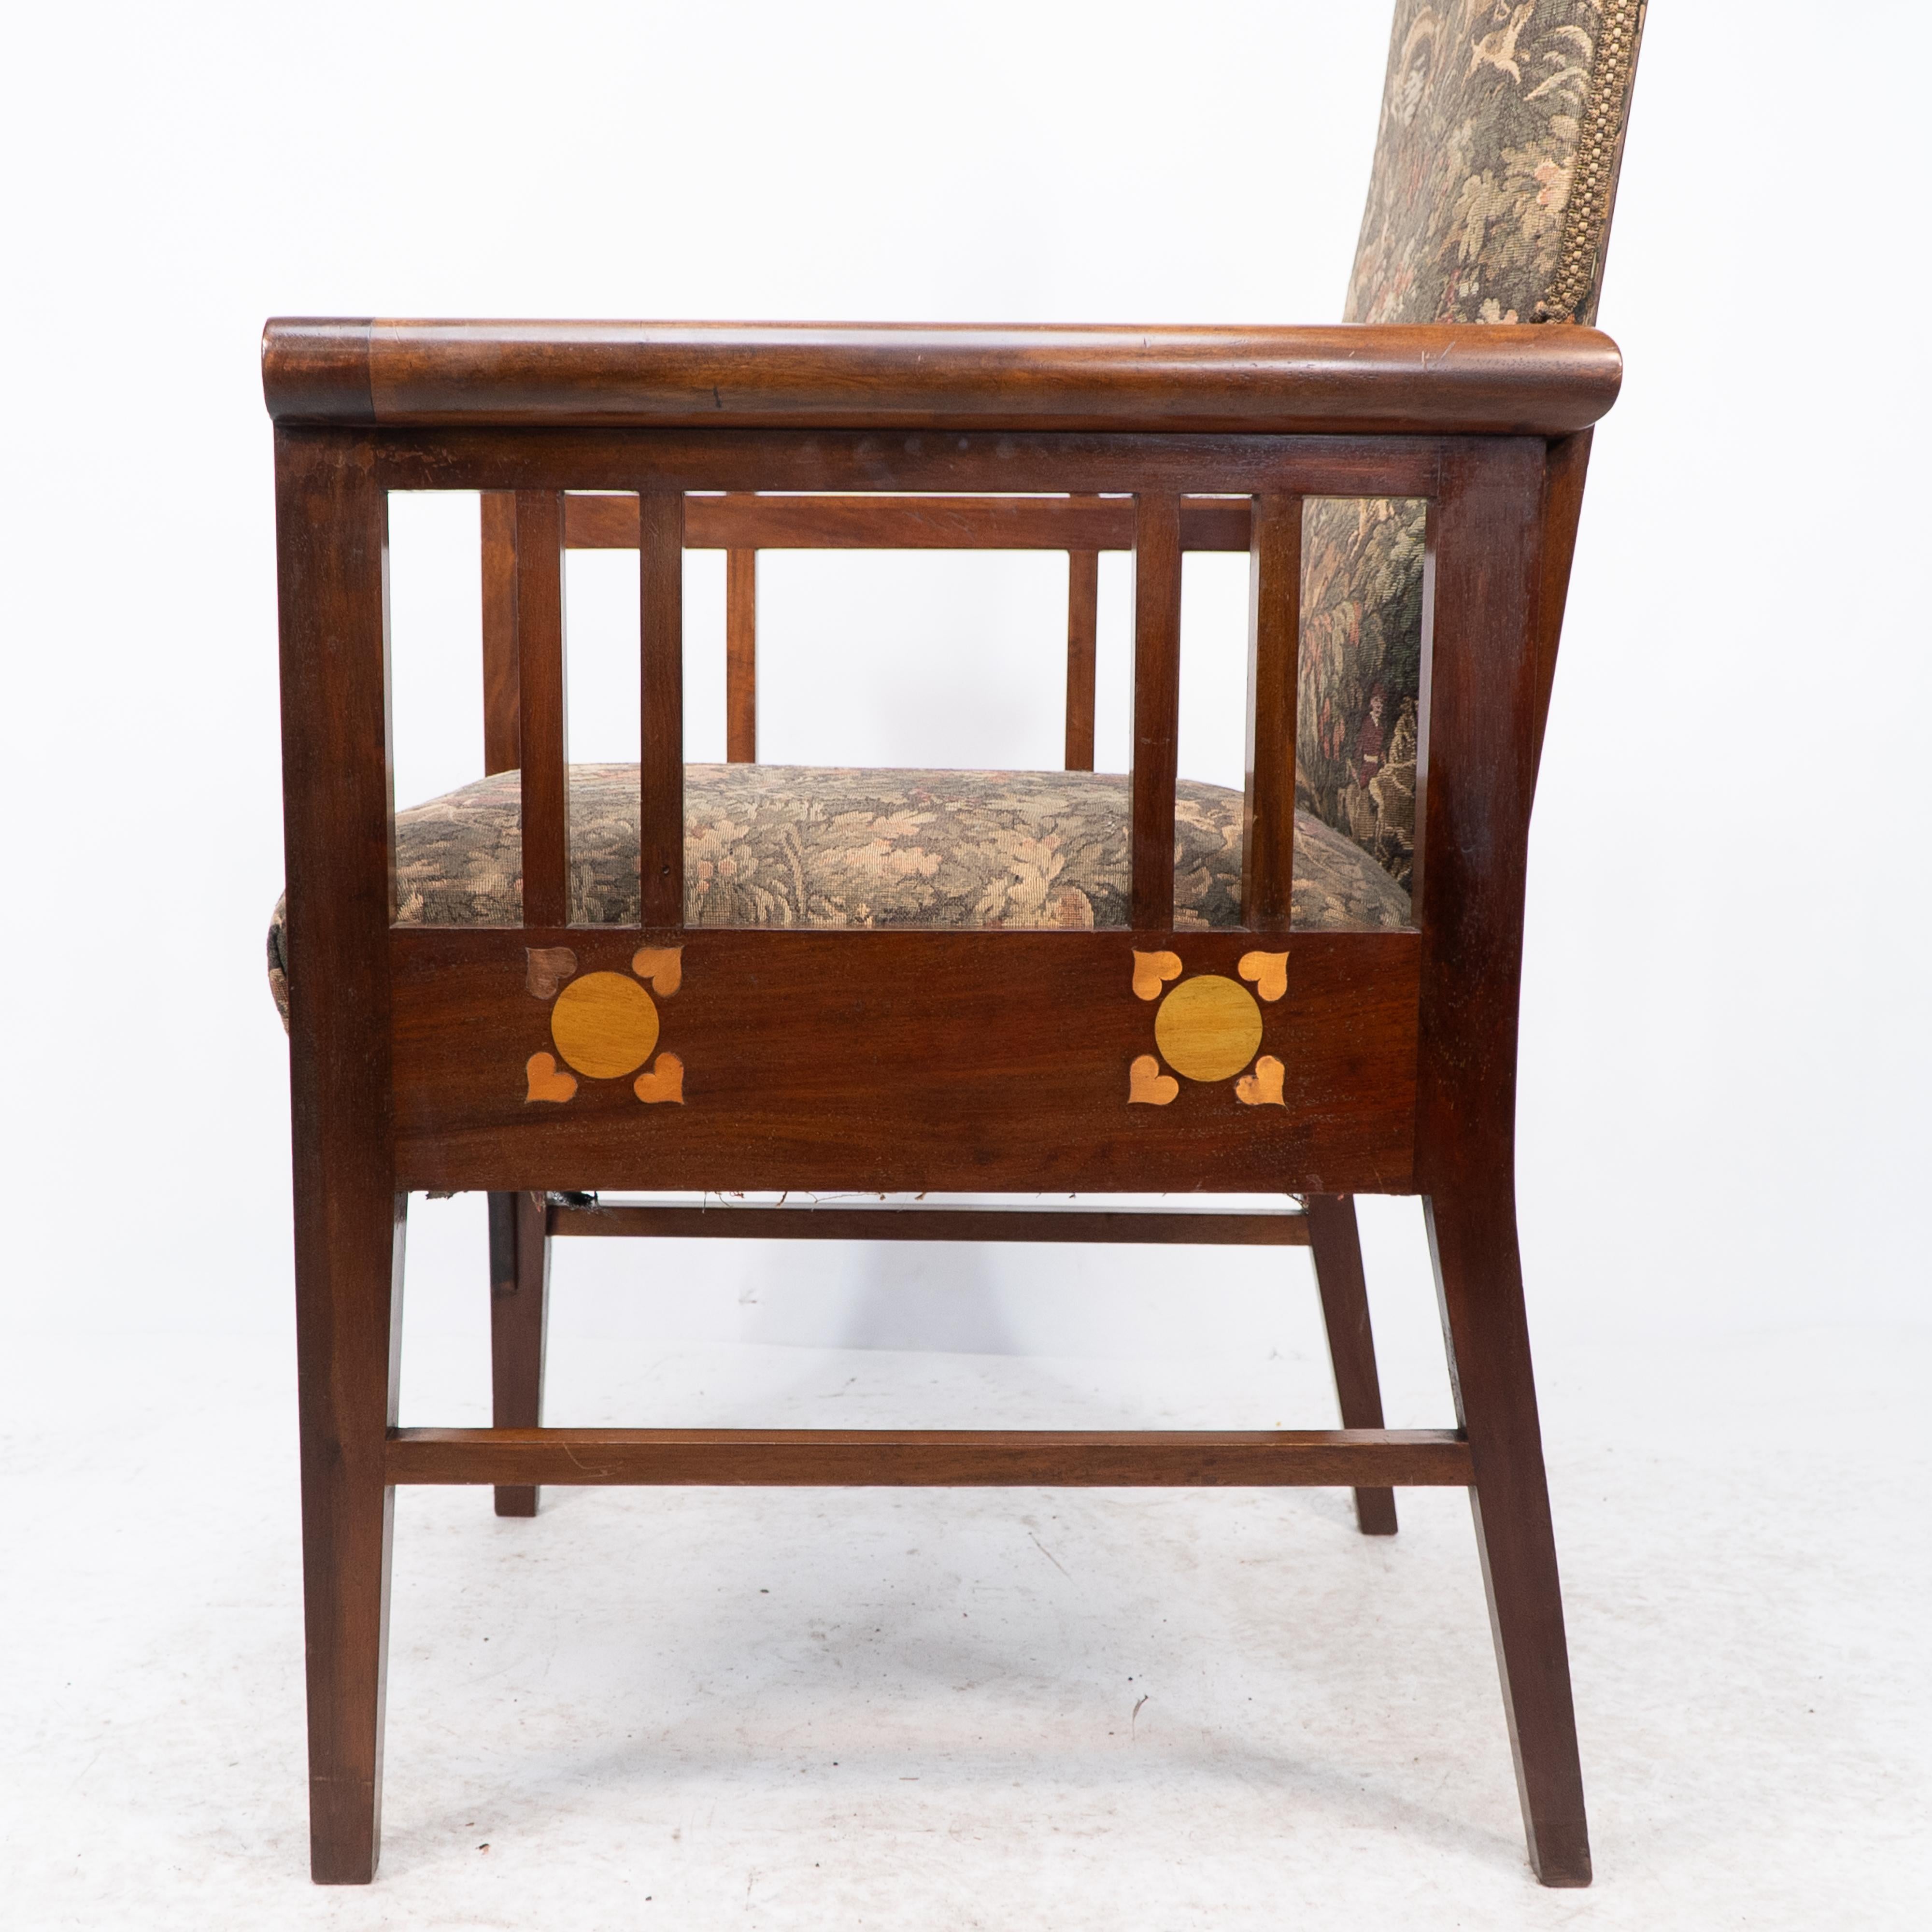 G M Ellwood for J S Henry. A Progressive New Art armchair with fruitwood inlays For Sale 5